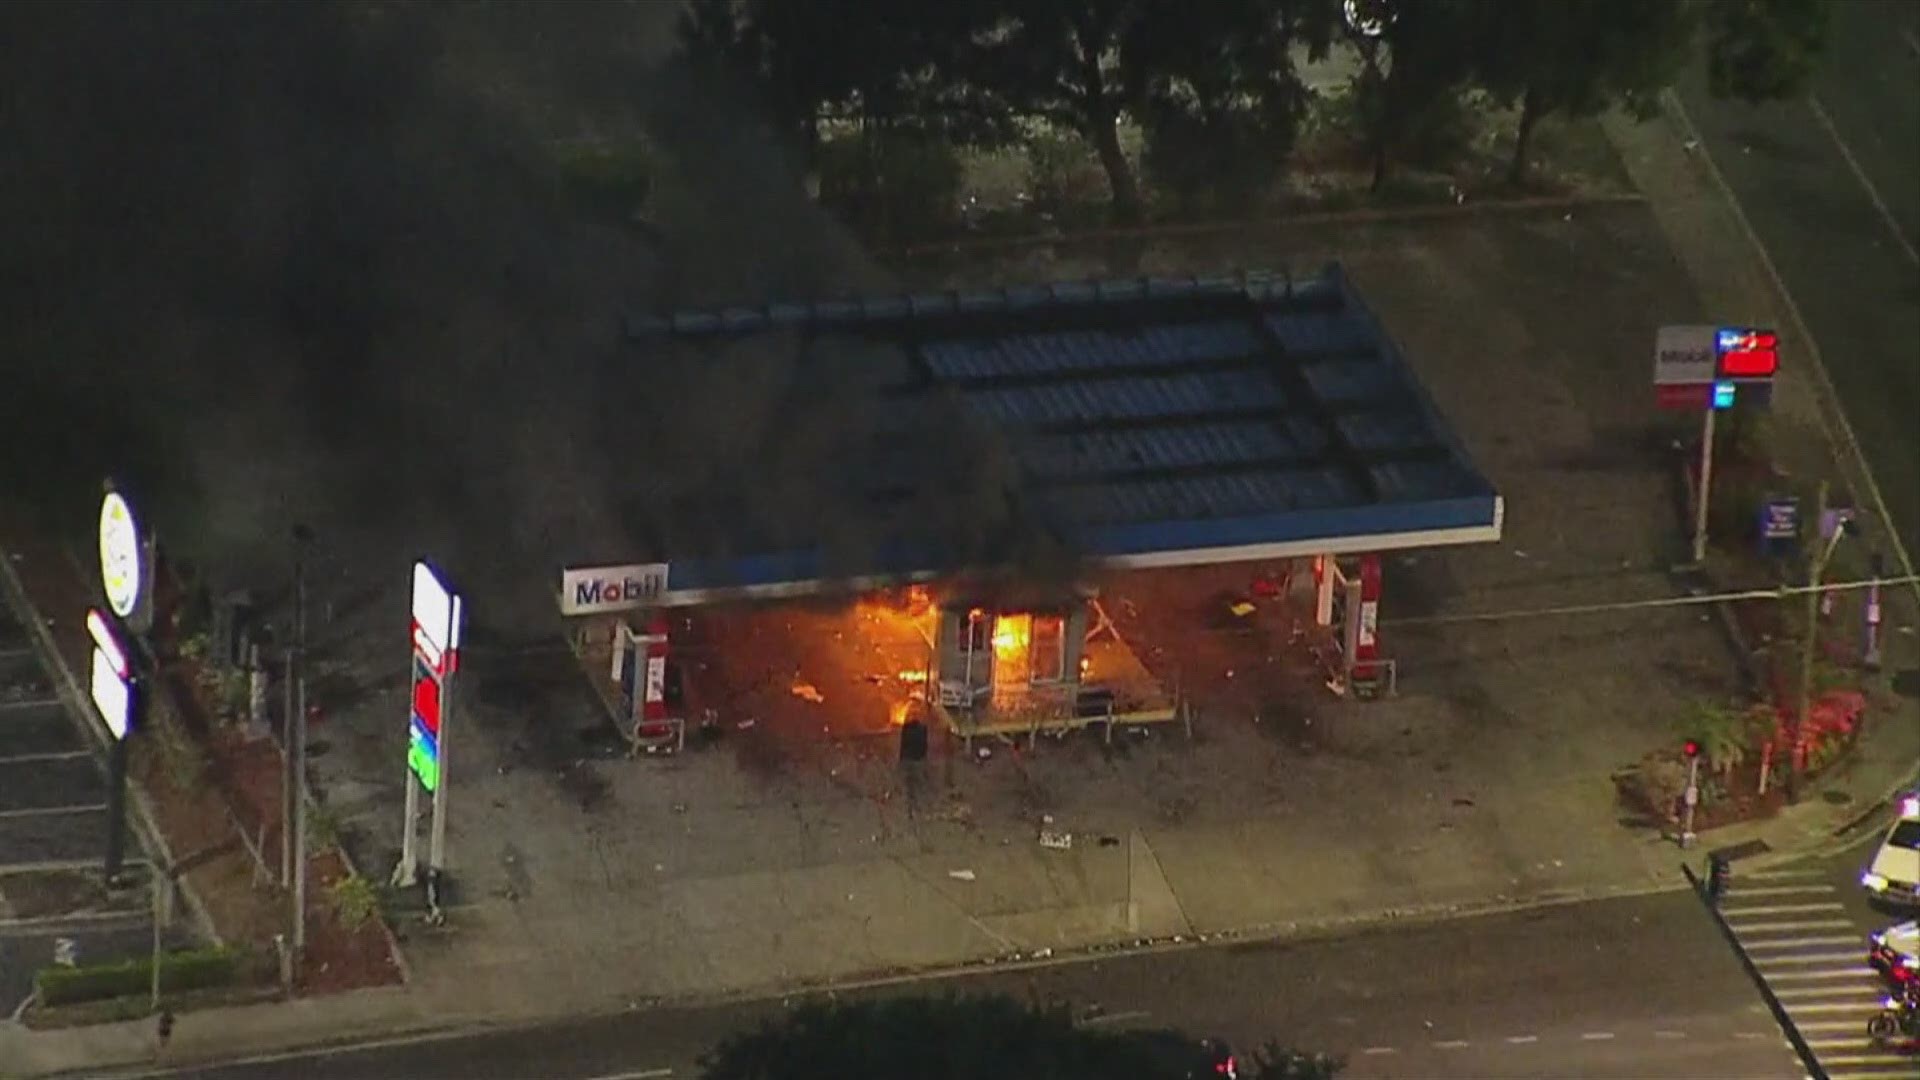 Tampa firefighters were called to the Mobil gas station at N. 30th Street and E. Busch Boulevard where a fire broke out, engulfing the entire building.